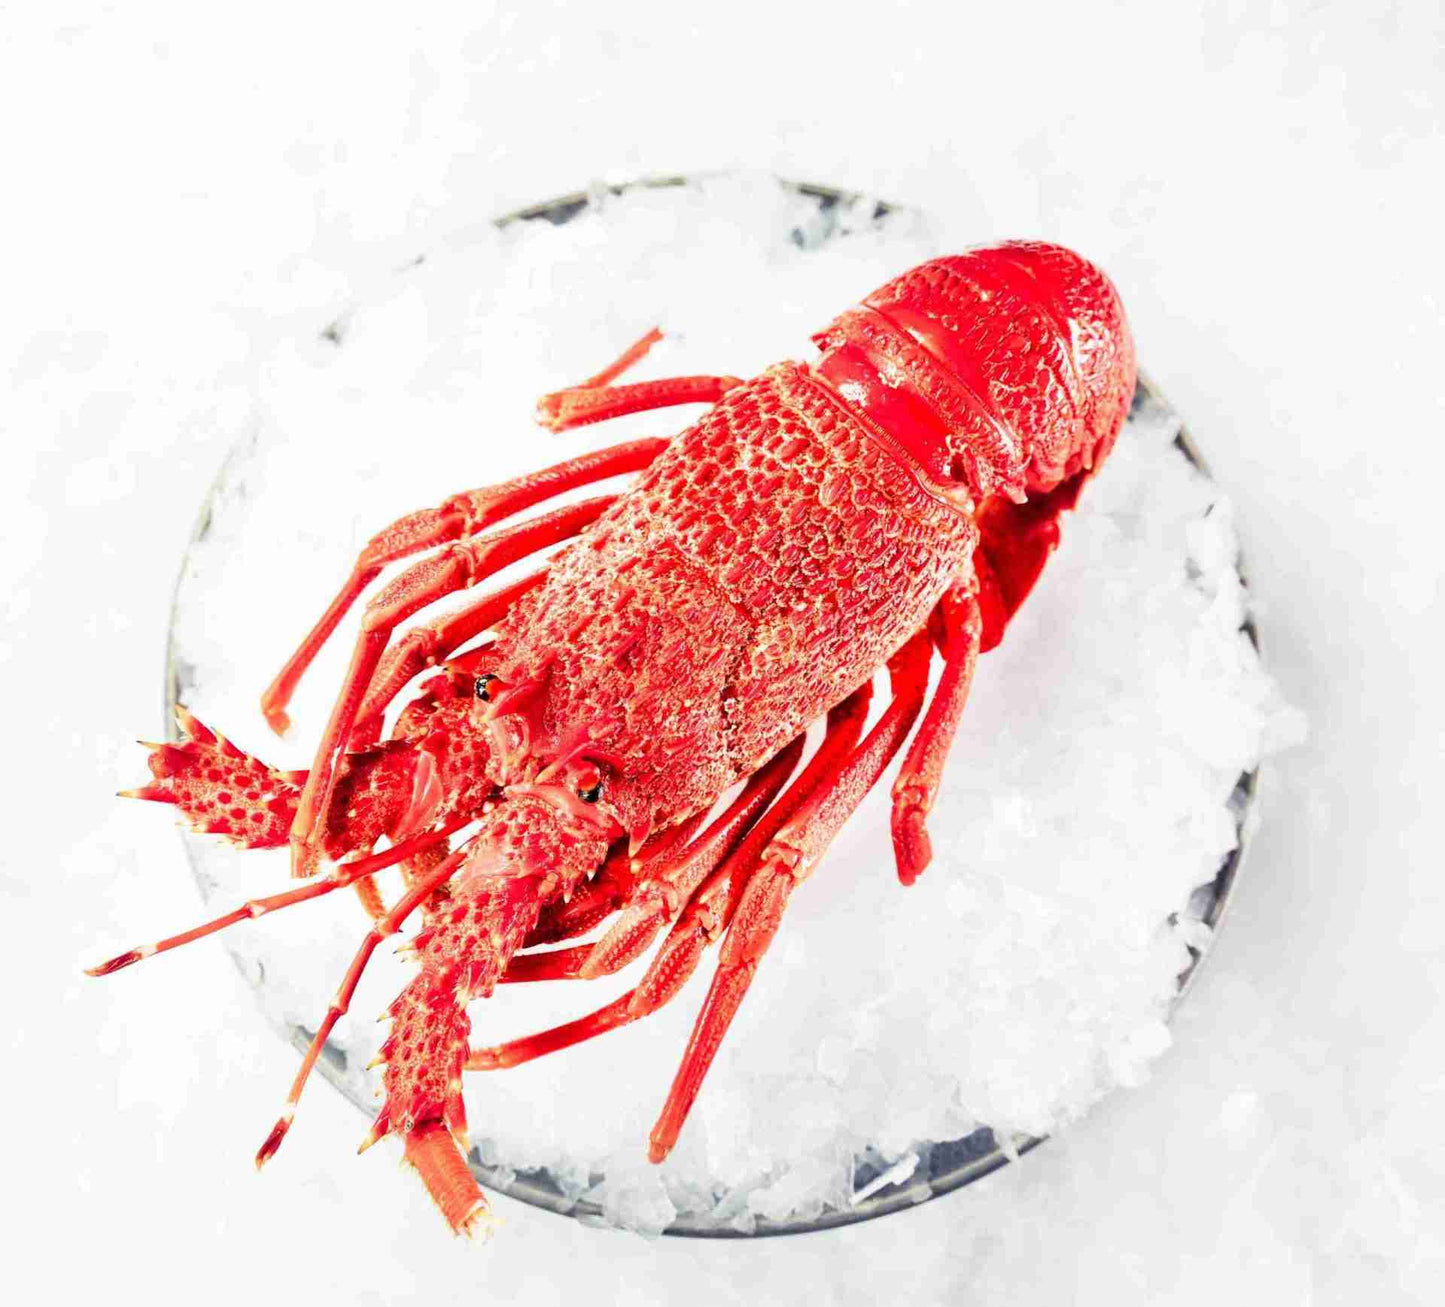 Southern Rock Lobster 600-800g per piece